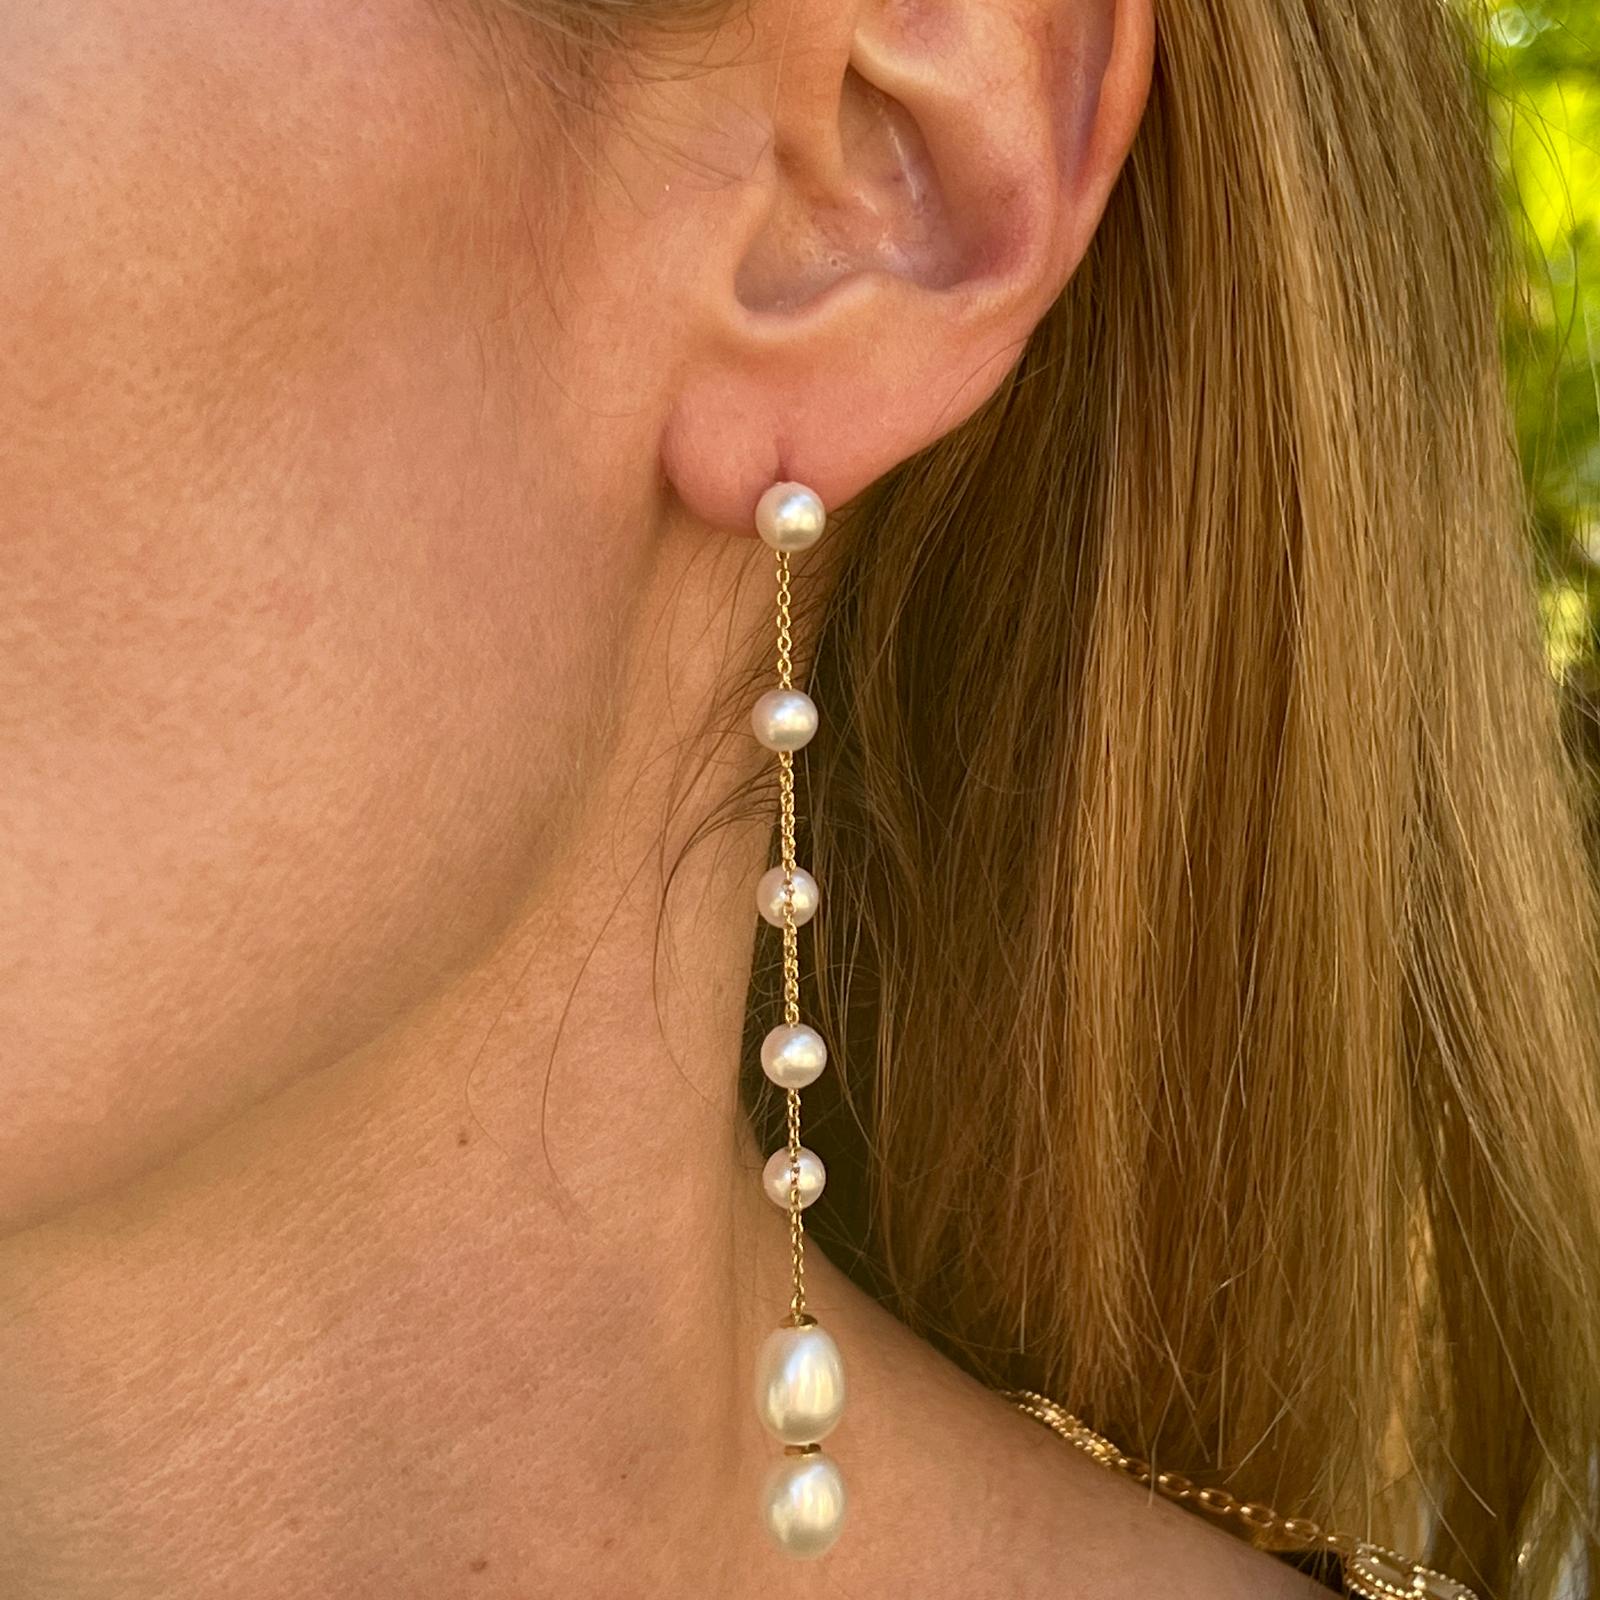 Pearl drop dangle earrings fashioned in 14 karat yellow gold. The earrings feature multi-strands of gold and cultured pearl drops measuring 3.5 inches in length. 